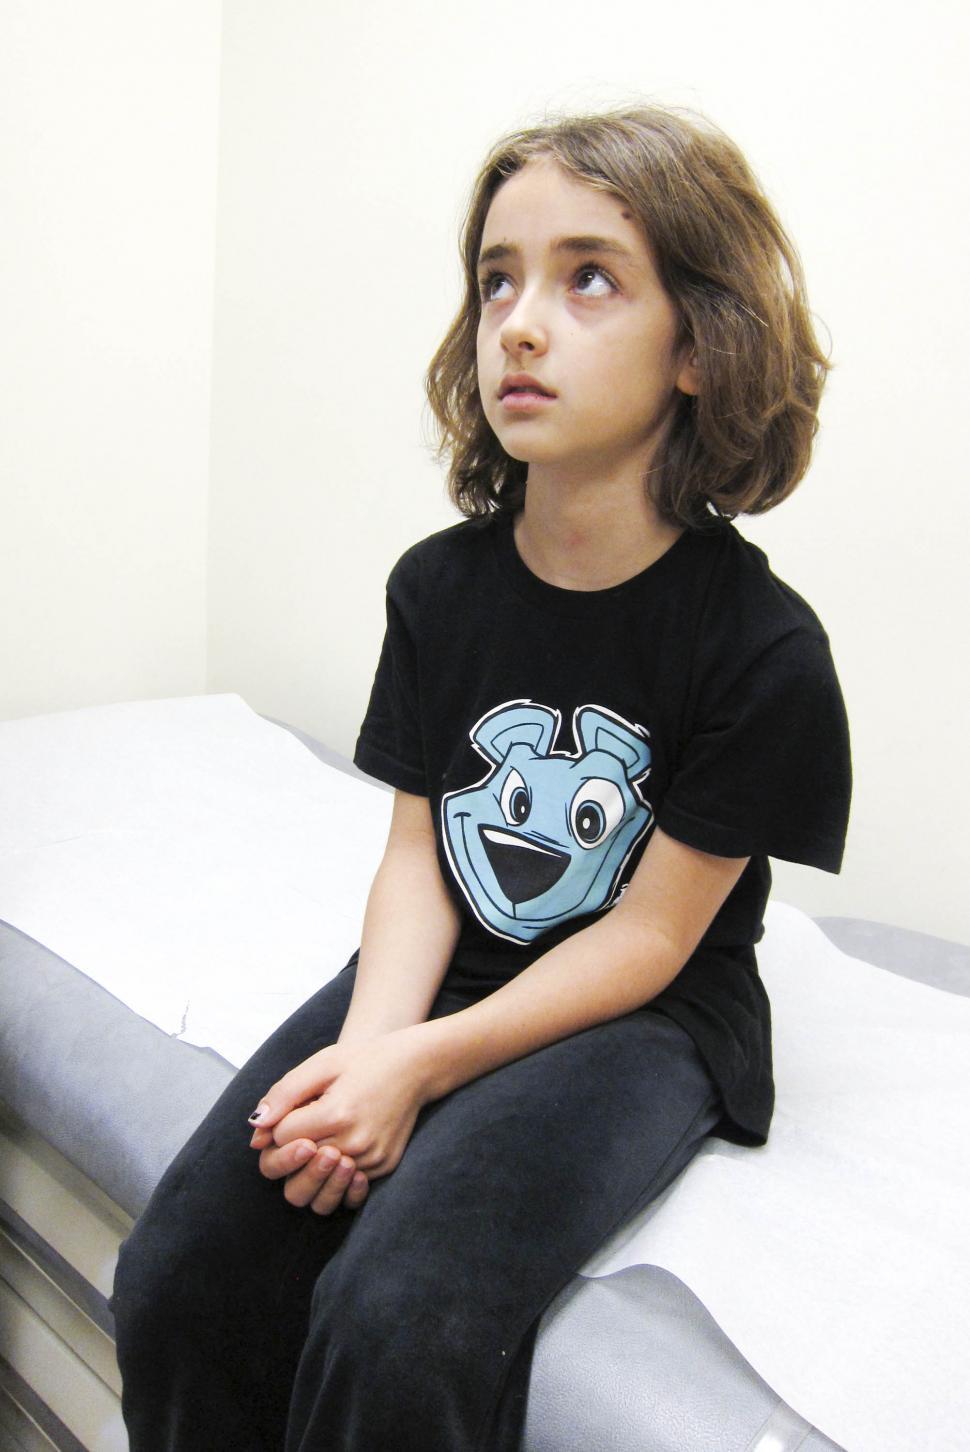 Free Image of Child Waits for Health Care 